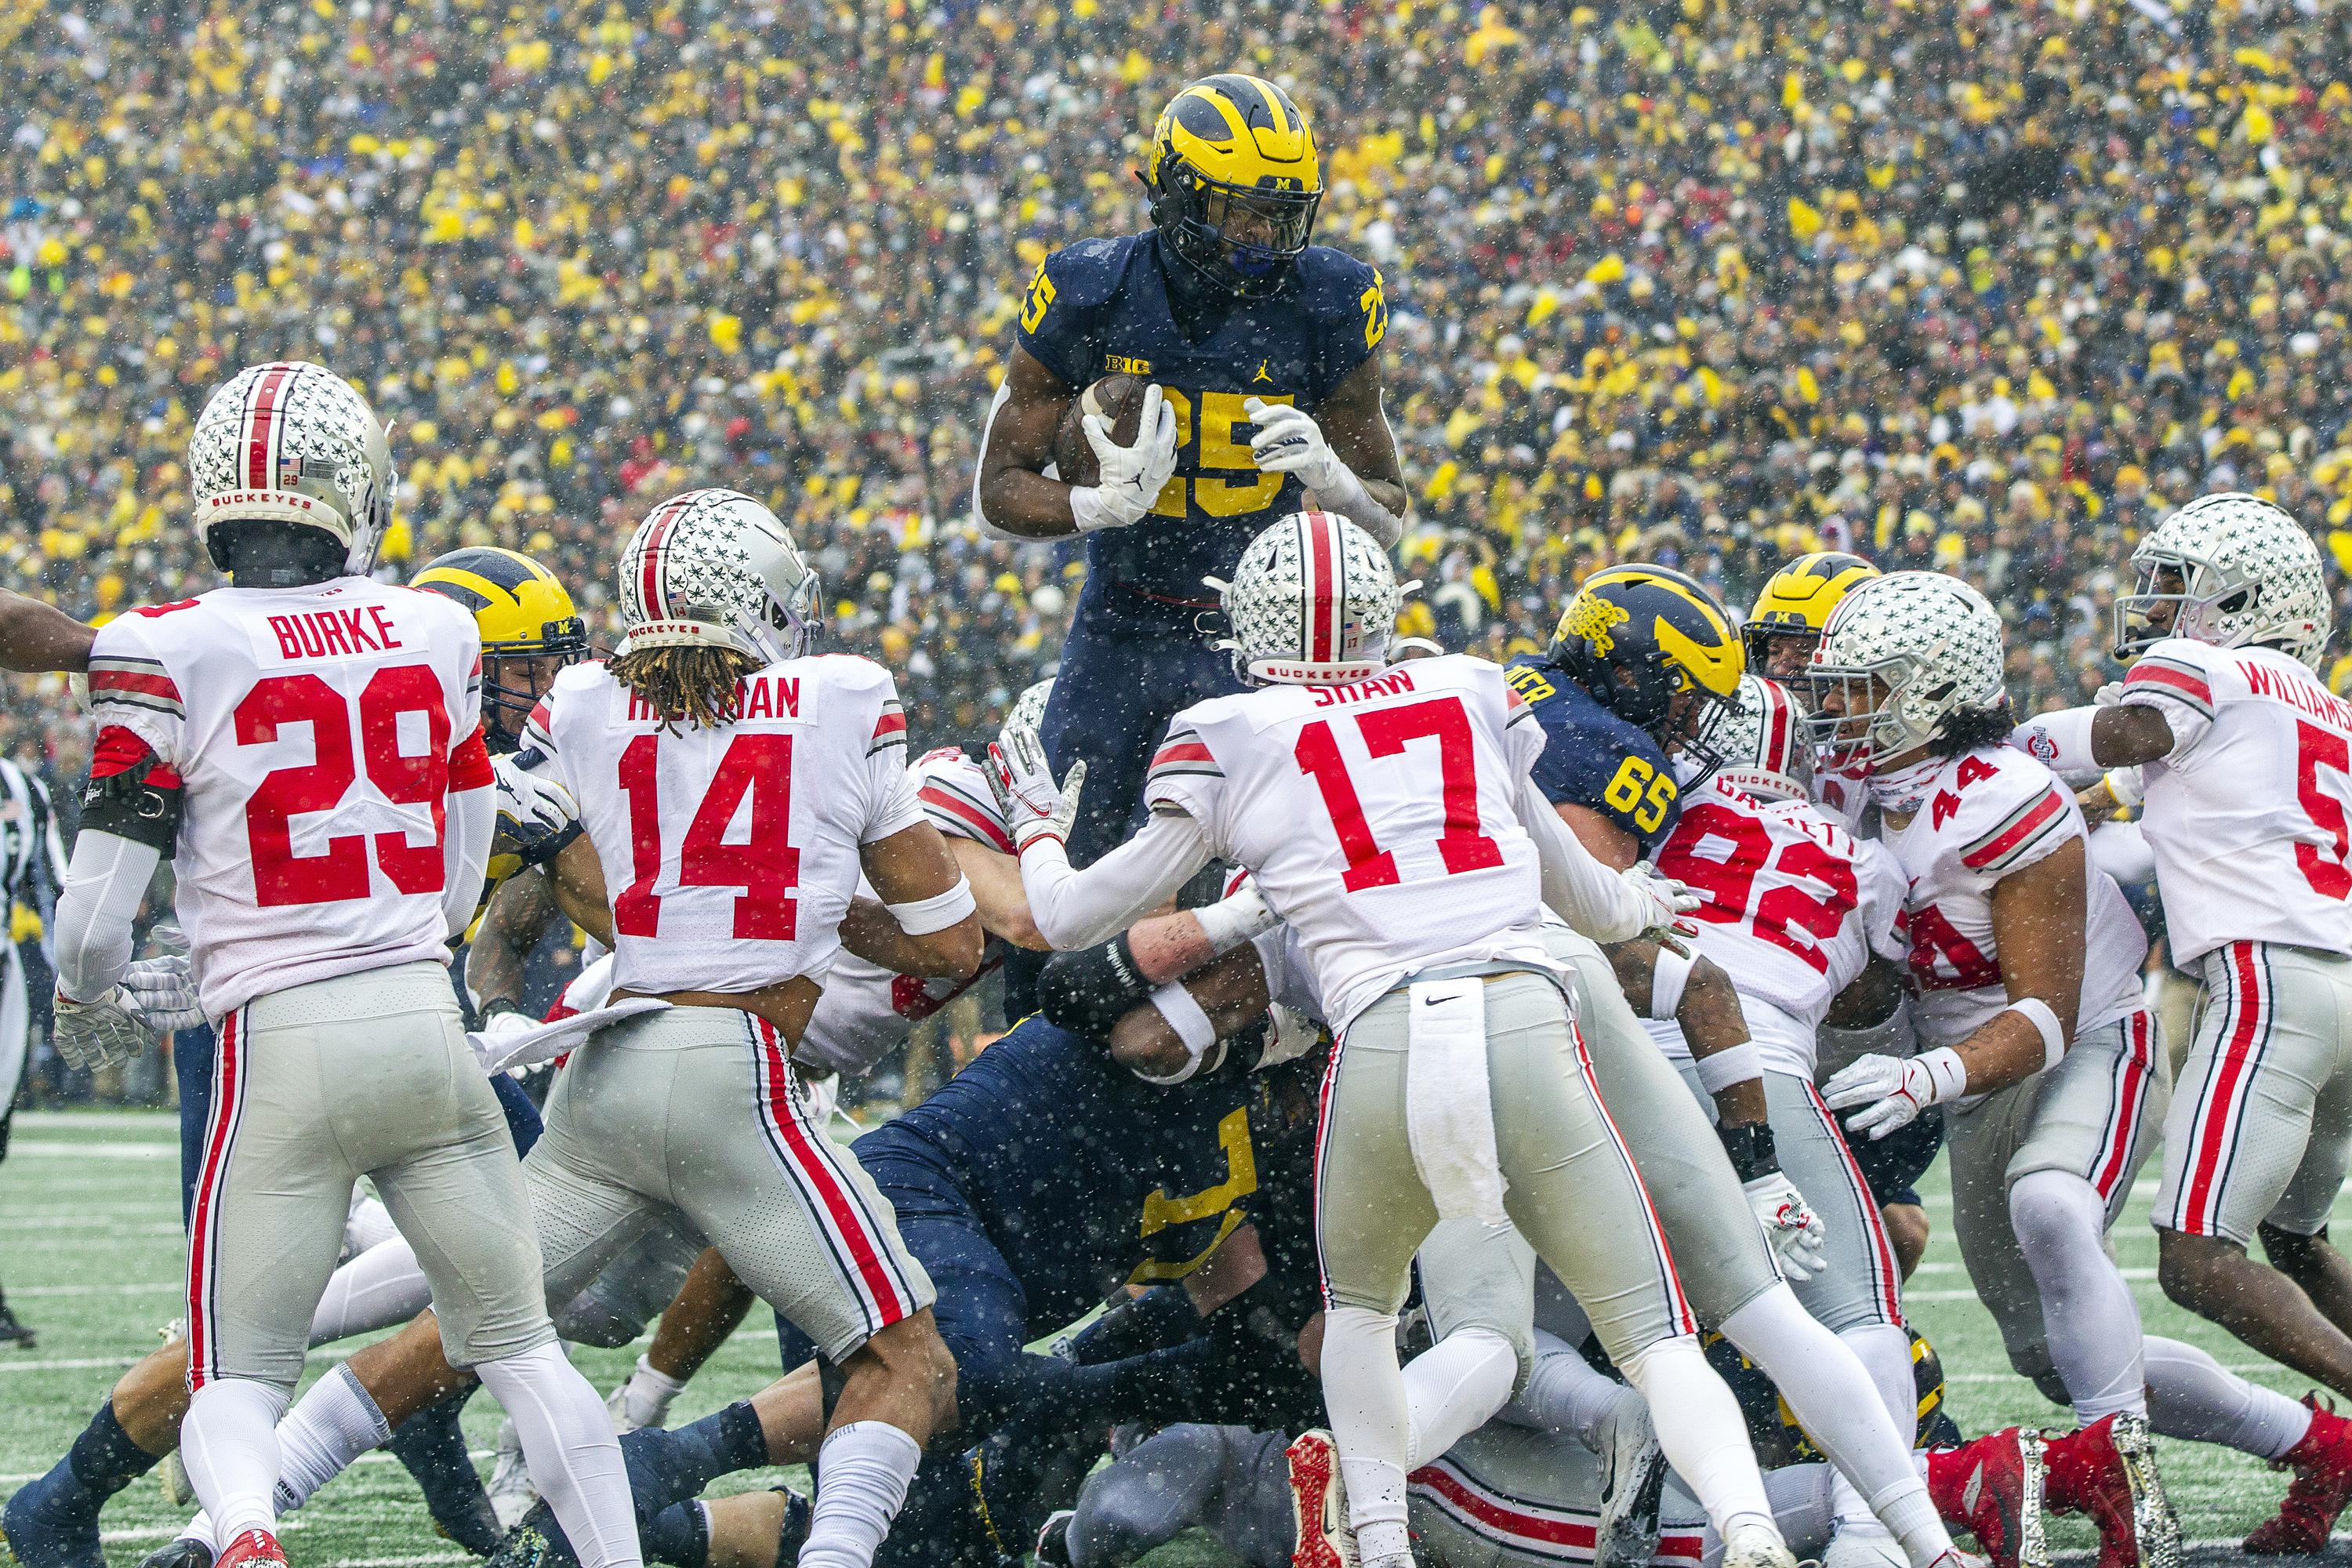 michigan-beats-ohio-state-42-27-ends-8-game-skid-in-rivalry-ap-news